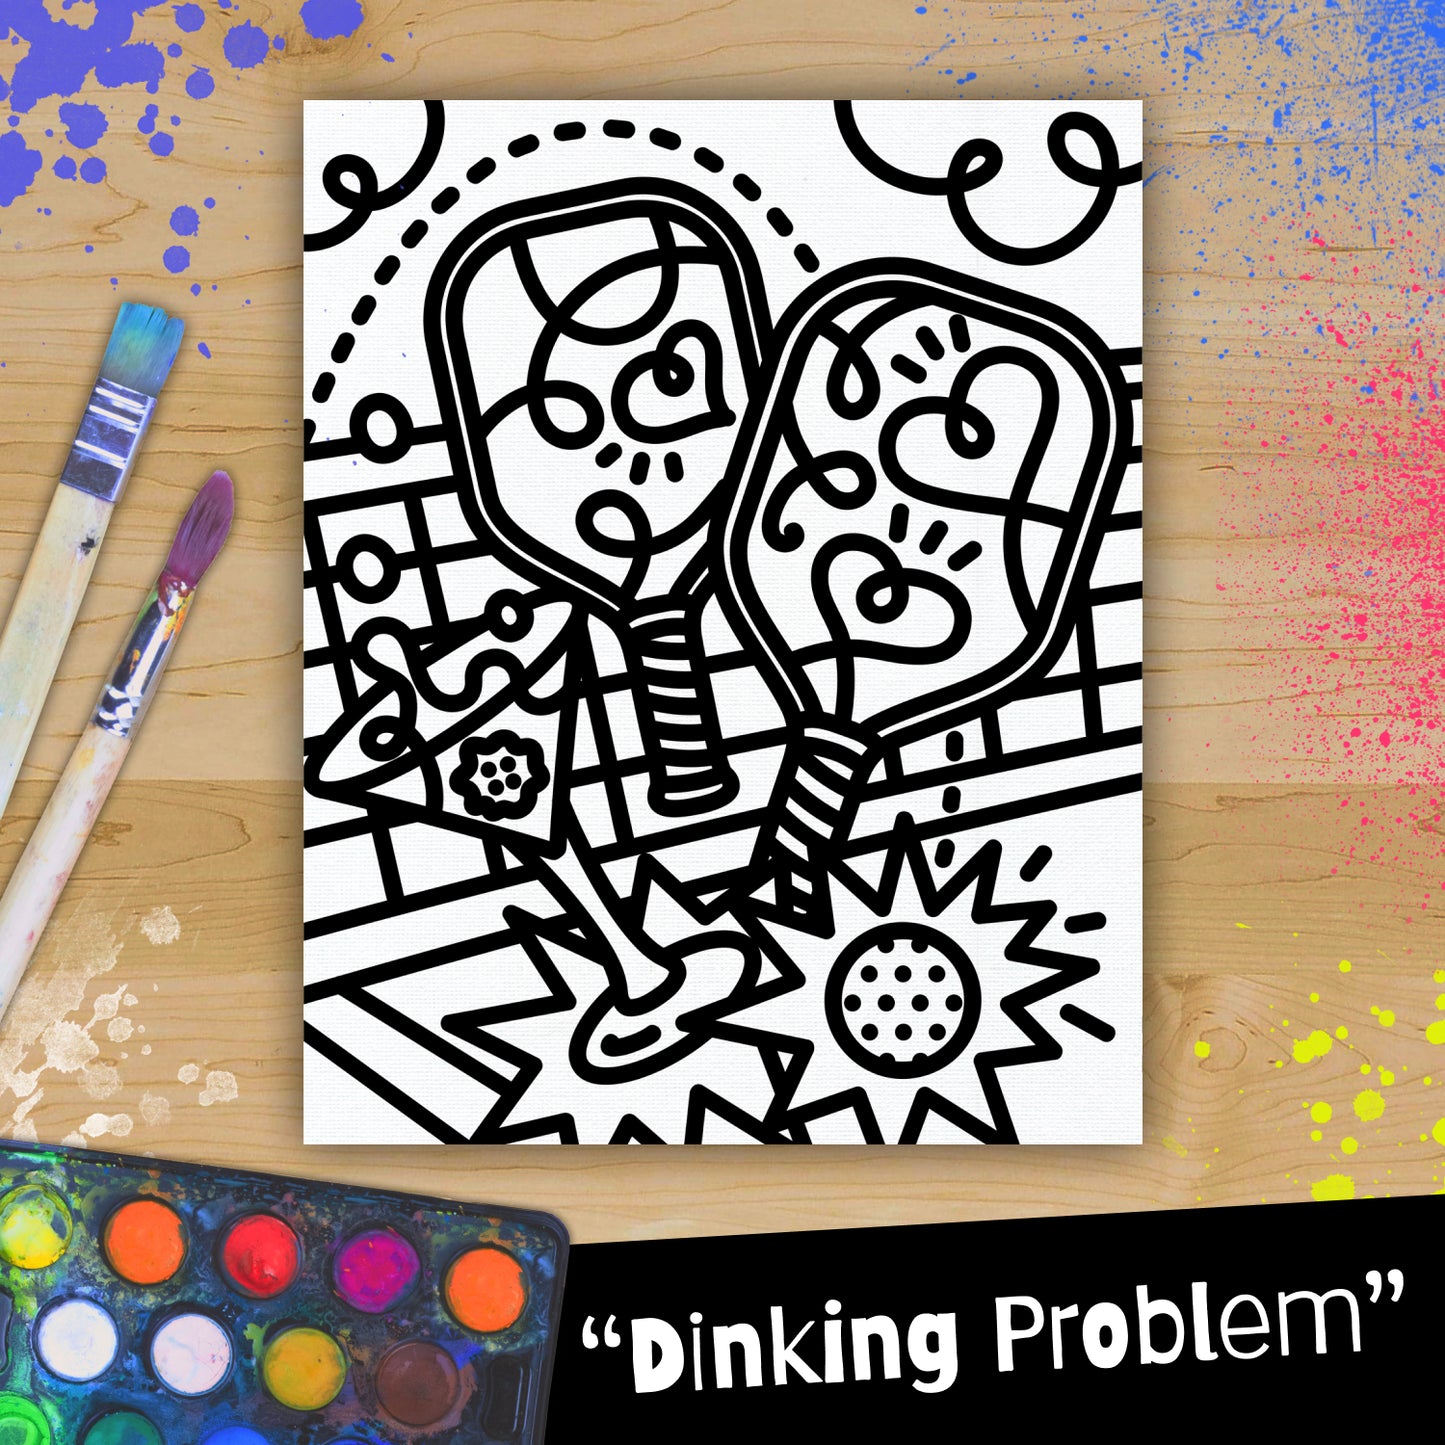 Dinking Problem - Paint-It-Yourself Canvas